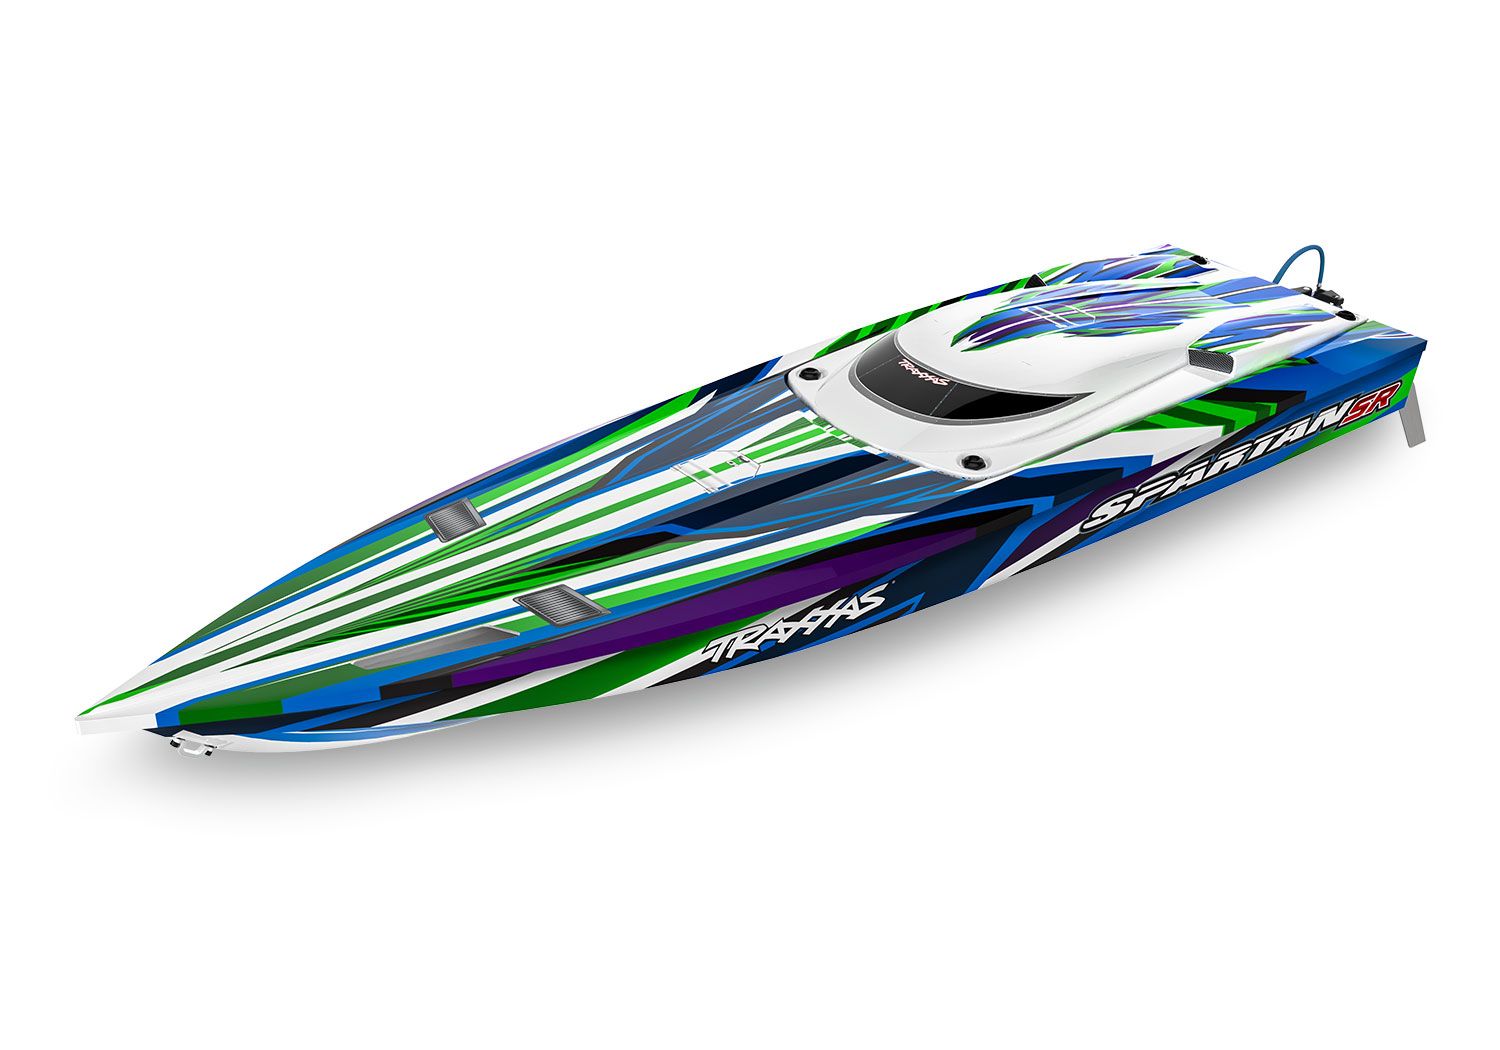 TRAXXAS 103076-4 Spartan SR: brushless race boat with self righting, TQi™ 2.4 GHz radio system, Traxxas Stability Management®, Velineon® 540XL Brushless Motor, VXL-6s Marine ESC, and factory-applied graphics.